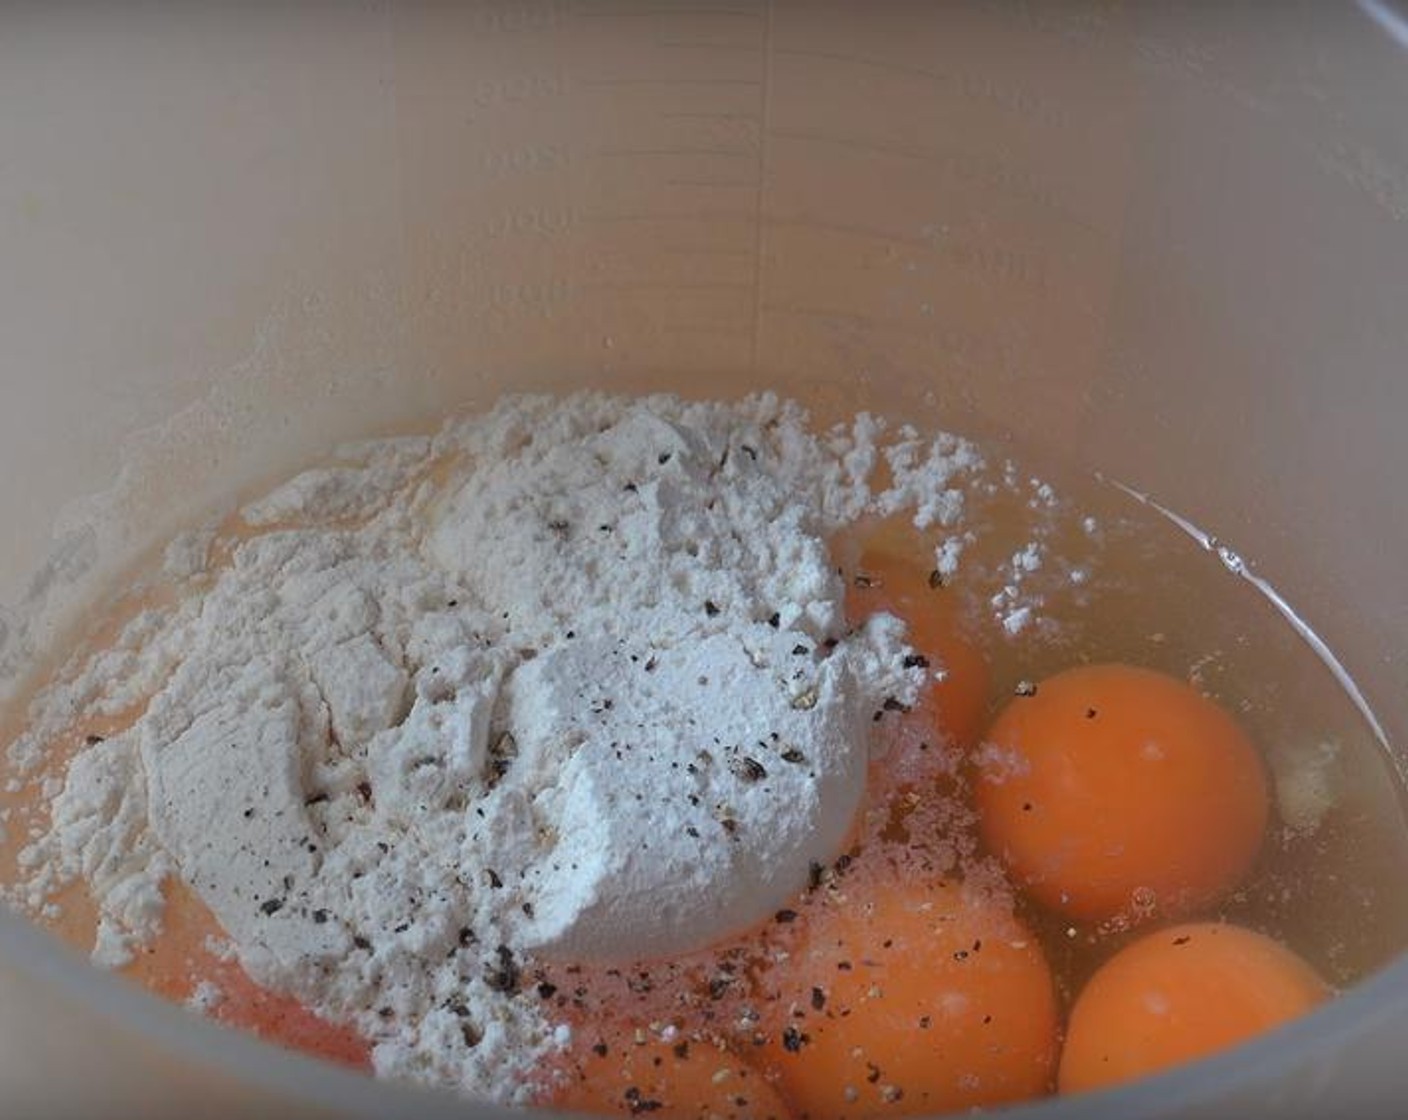 step 3 Put Eggs (10) in a large mixing jug. Add Self-Rising Flour (1/4 cup), Salt (to taste), and Ground Black Pepper (to taste). Stir the mix with a whisk until it's smooth.